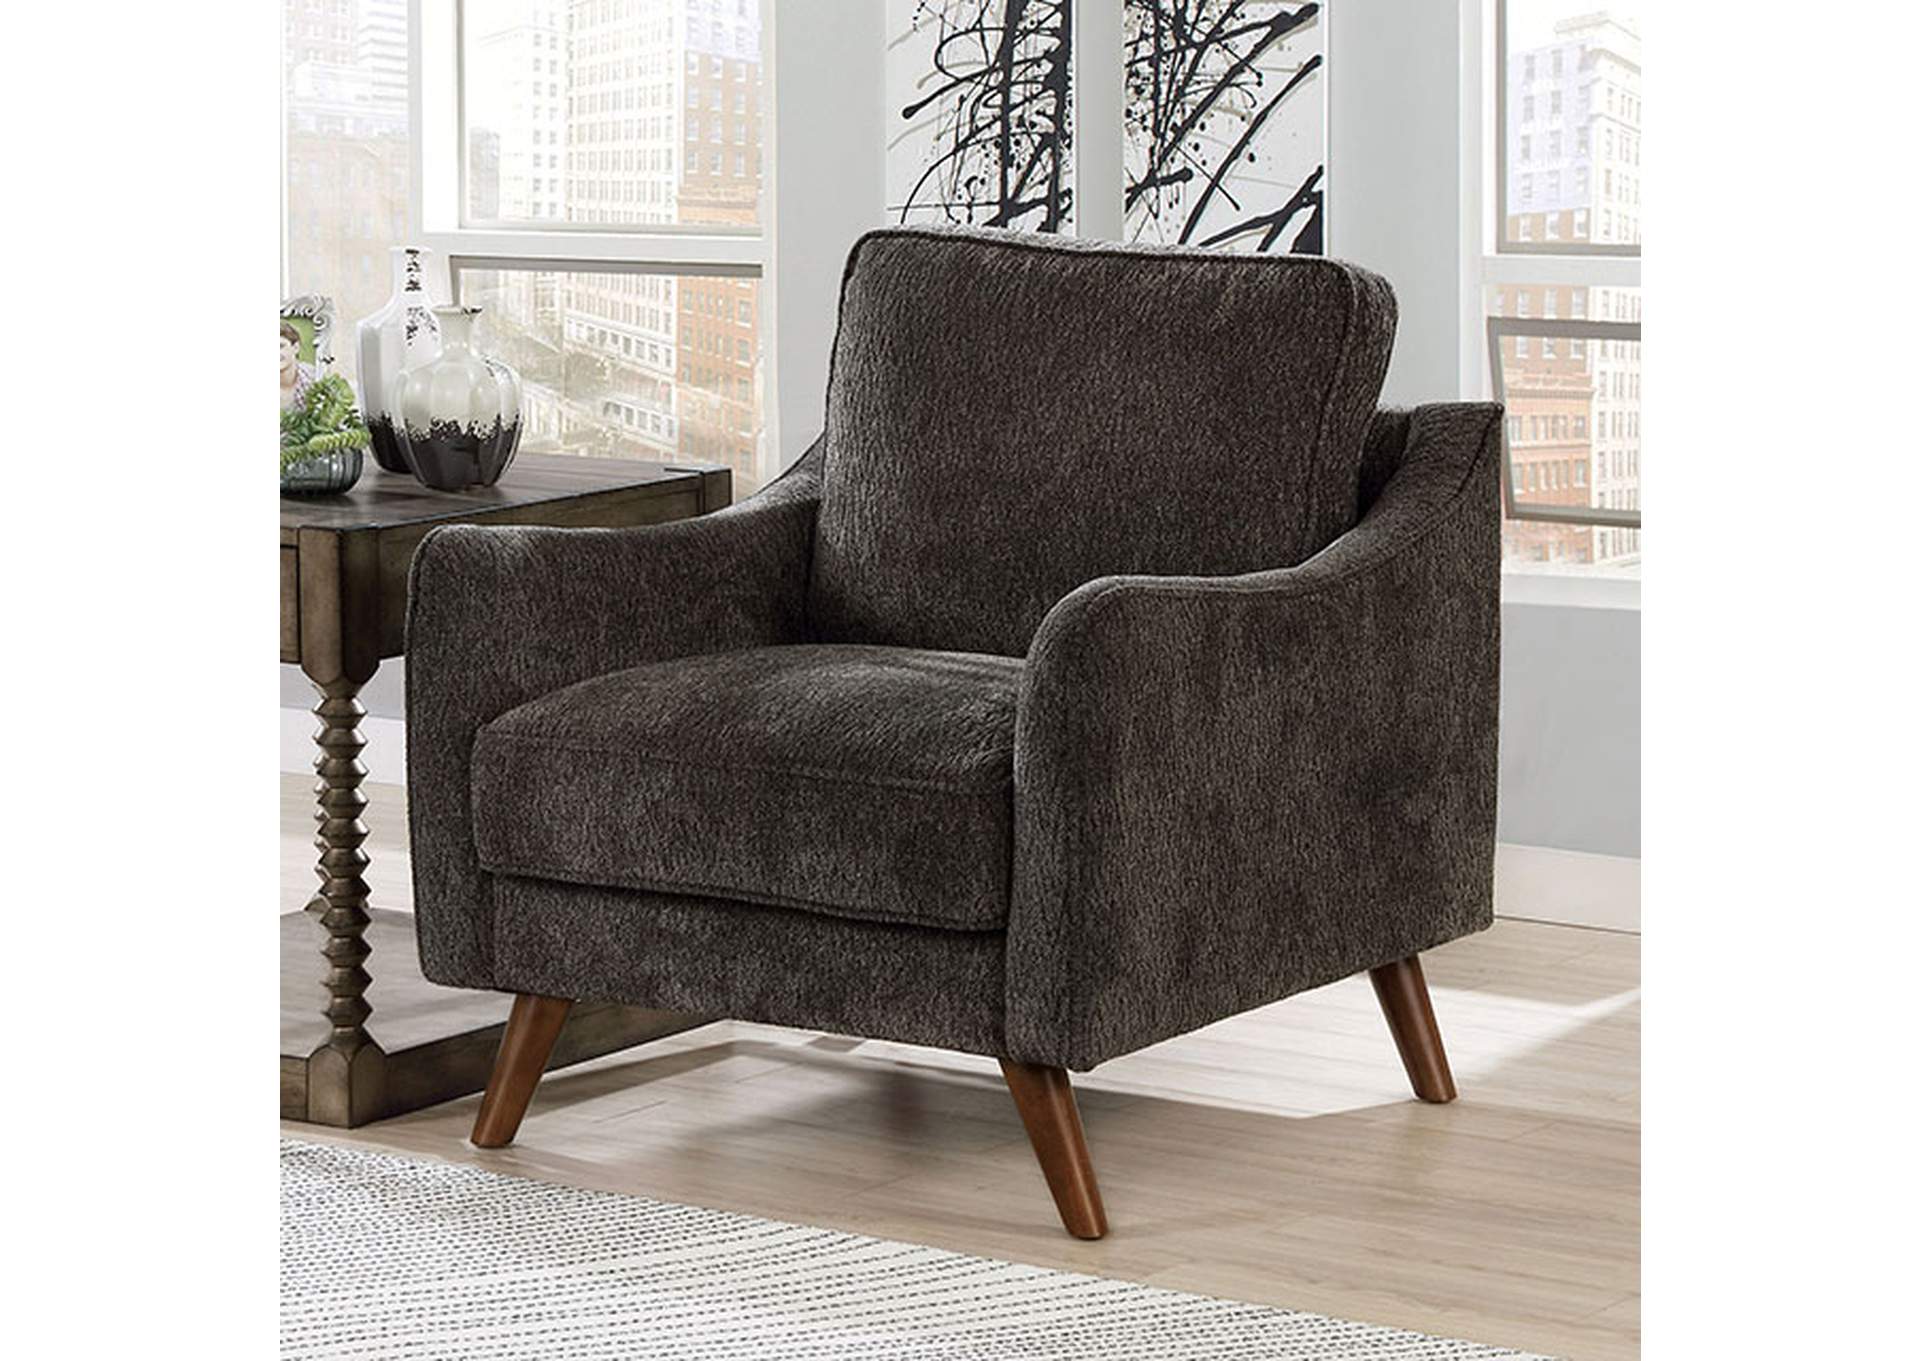 Maxime Chair,Furniture of America